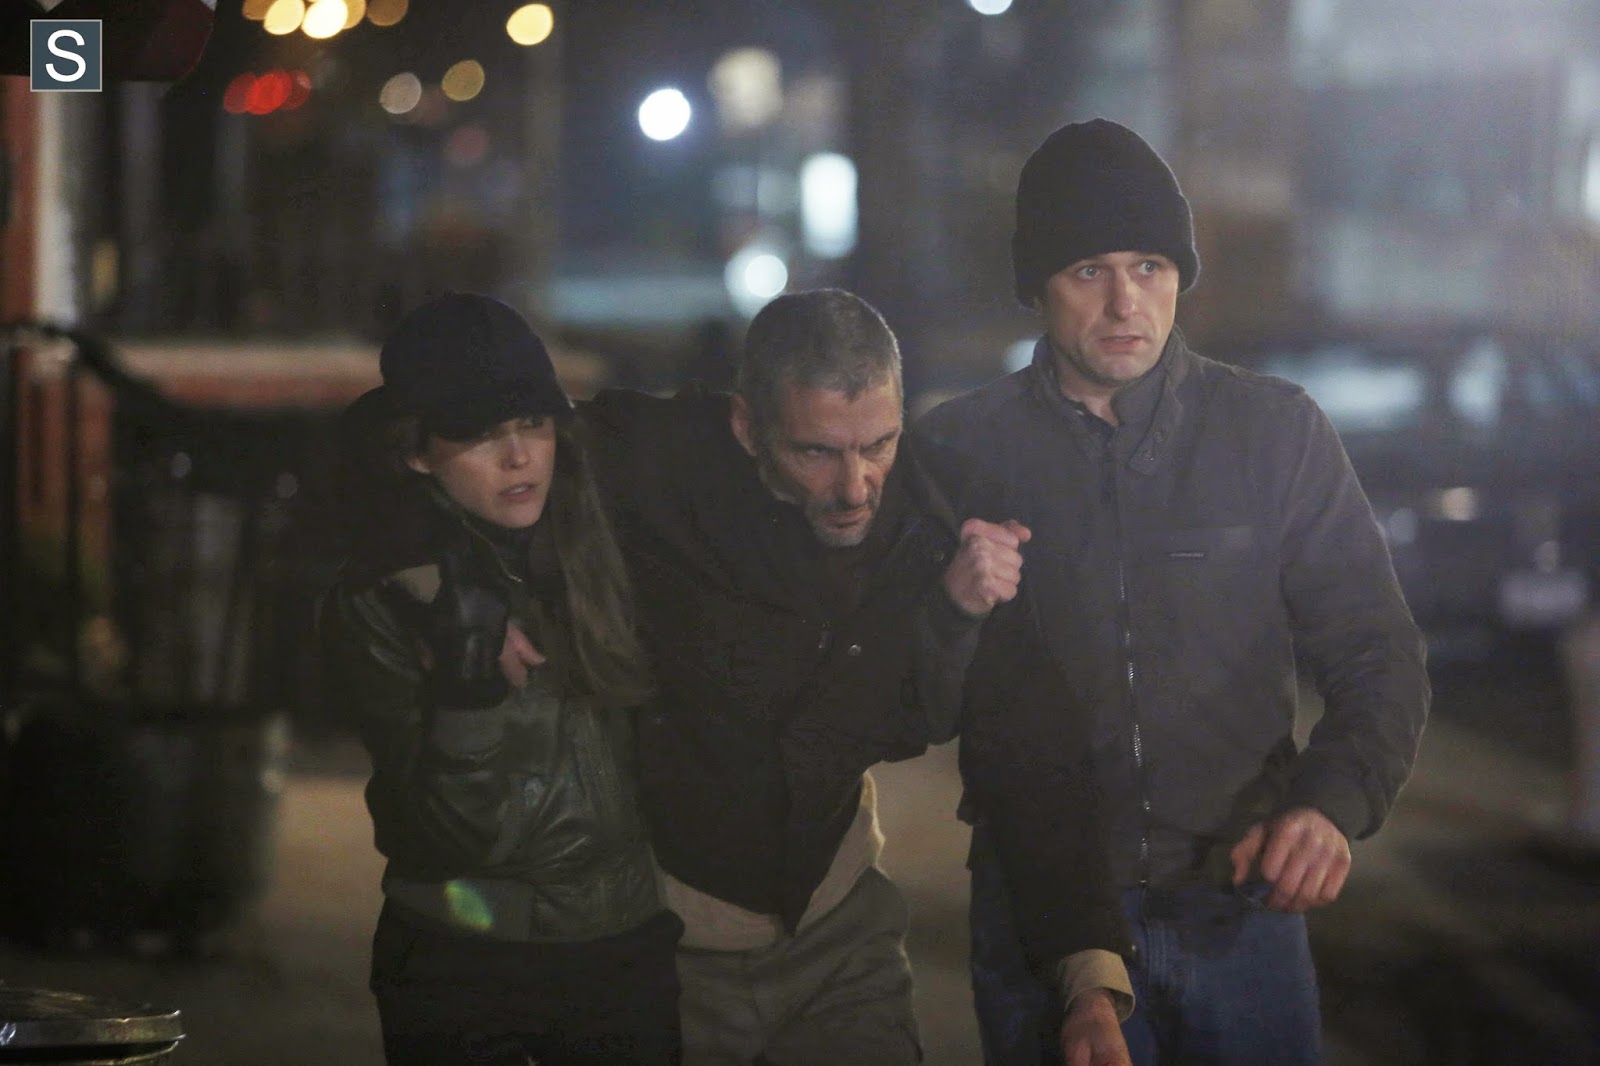 The Americans - Episode 2.05 - The Deal - Advance Review